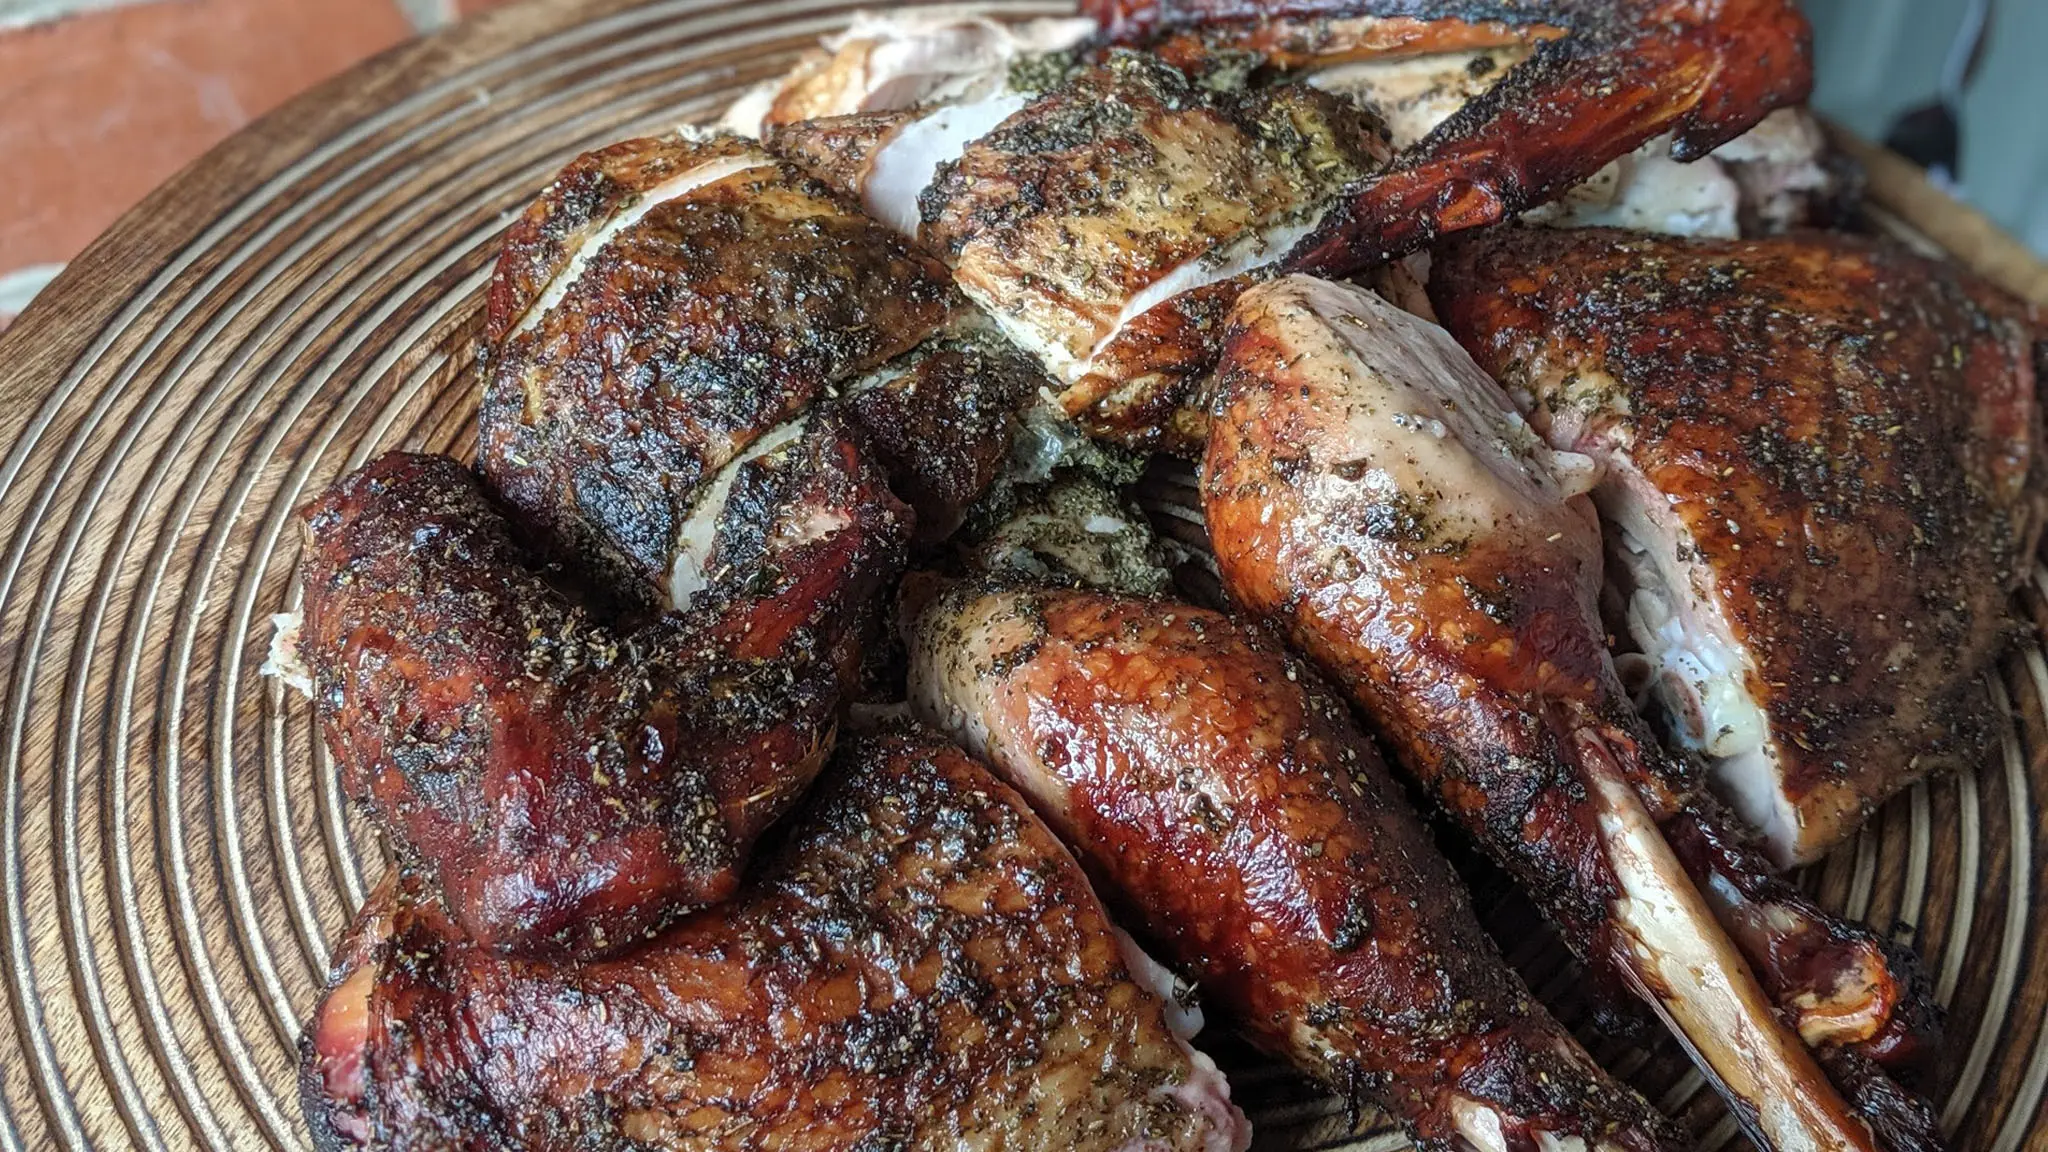 bbq smoked turkey - What is the best temperature to barbecue a turkey